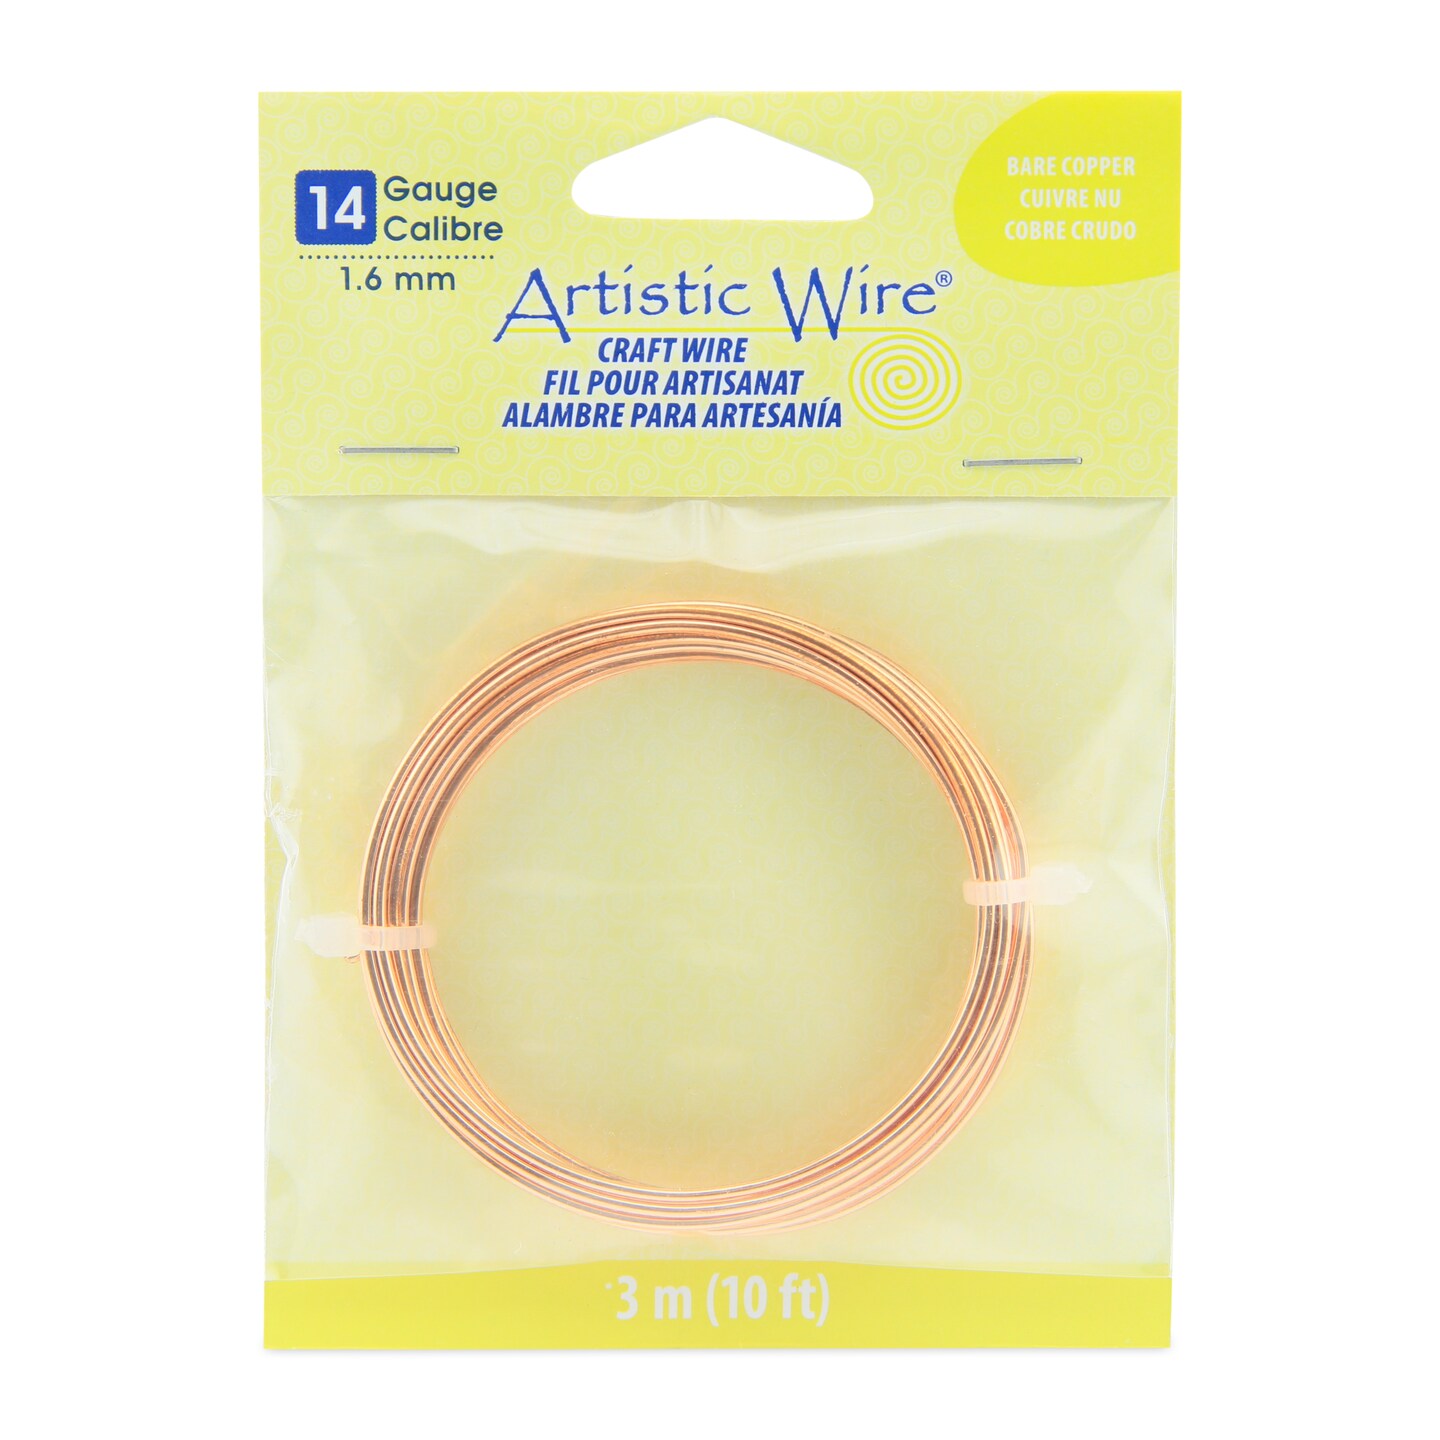 Artistic Wire Colored Copper Craft Wire, 14 Gauge (1.6mm) 10 ft